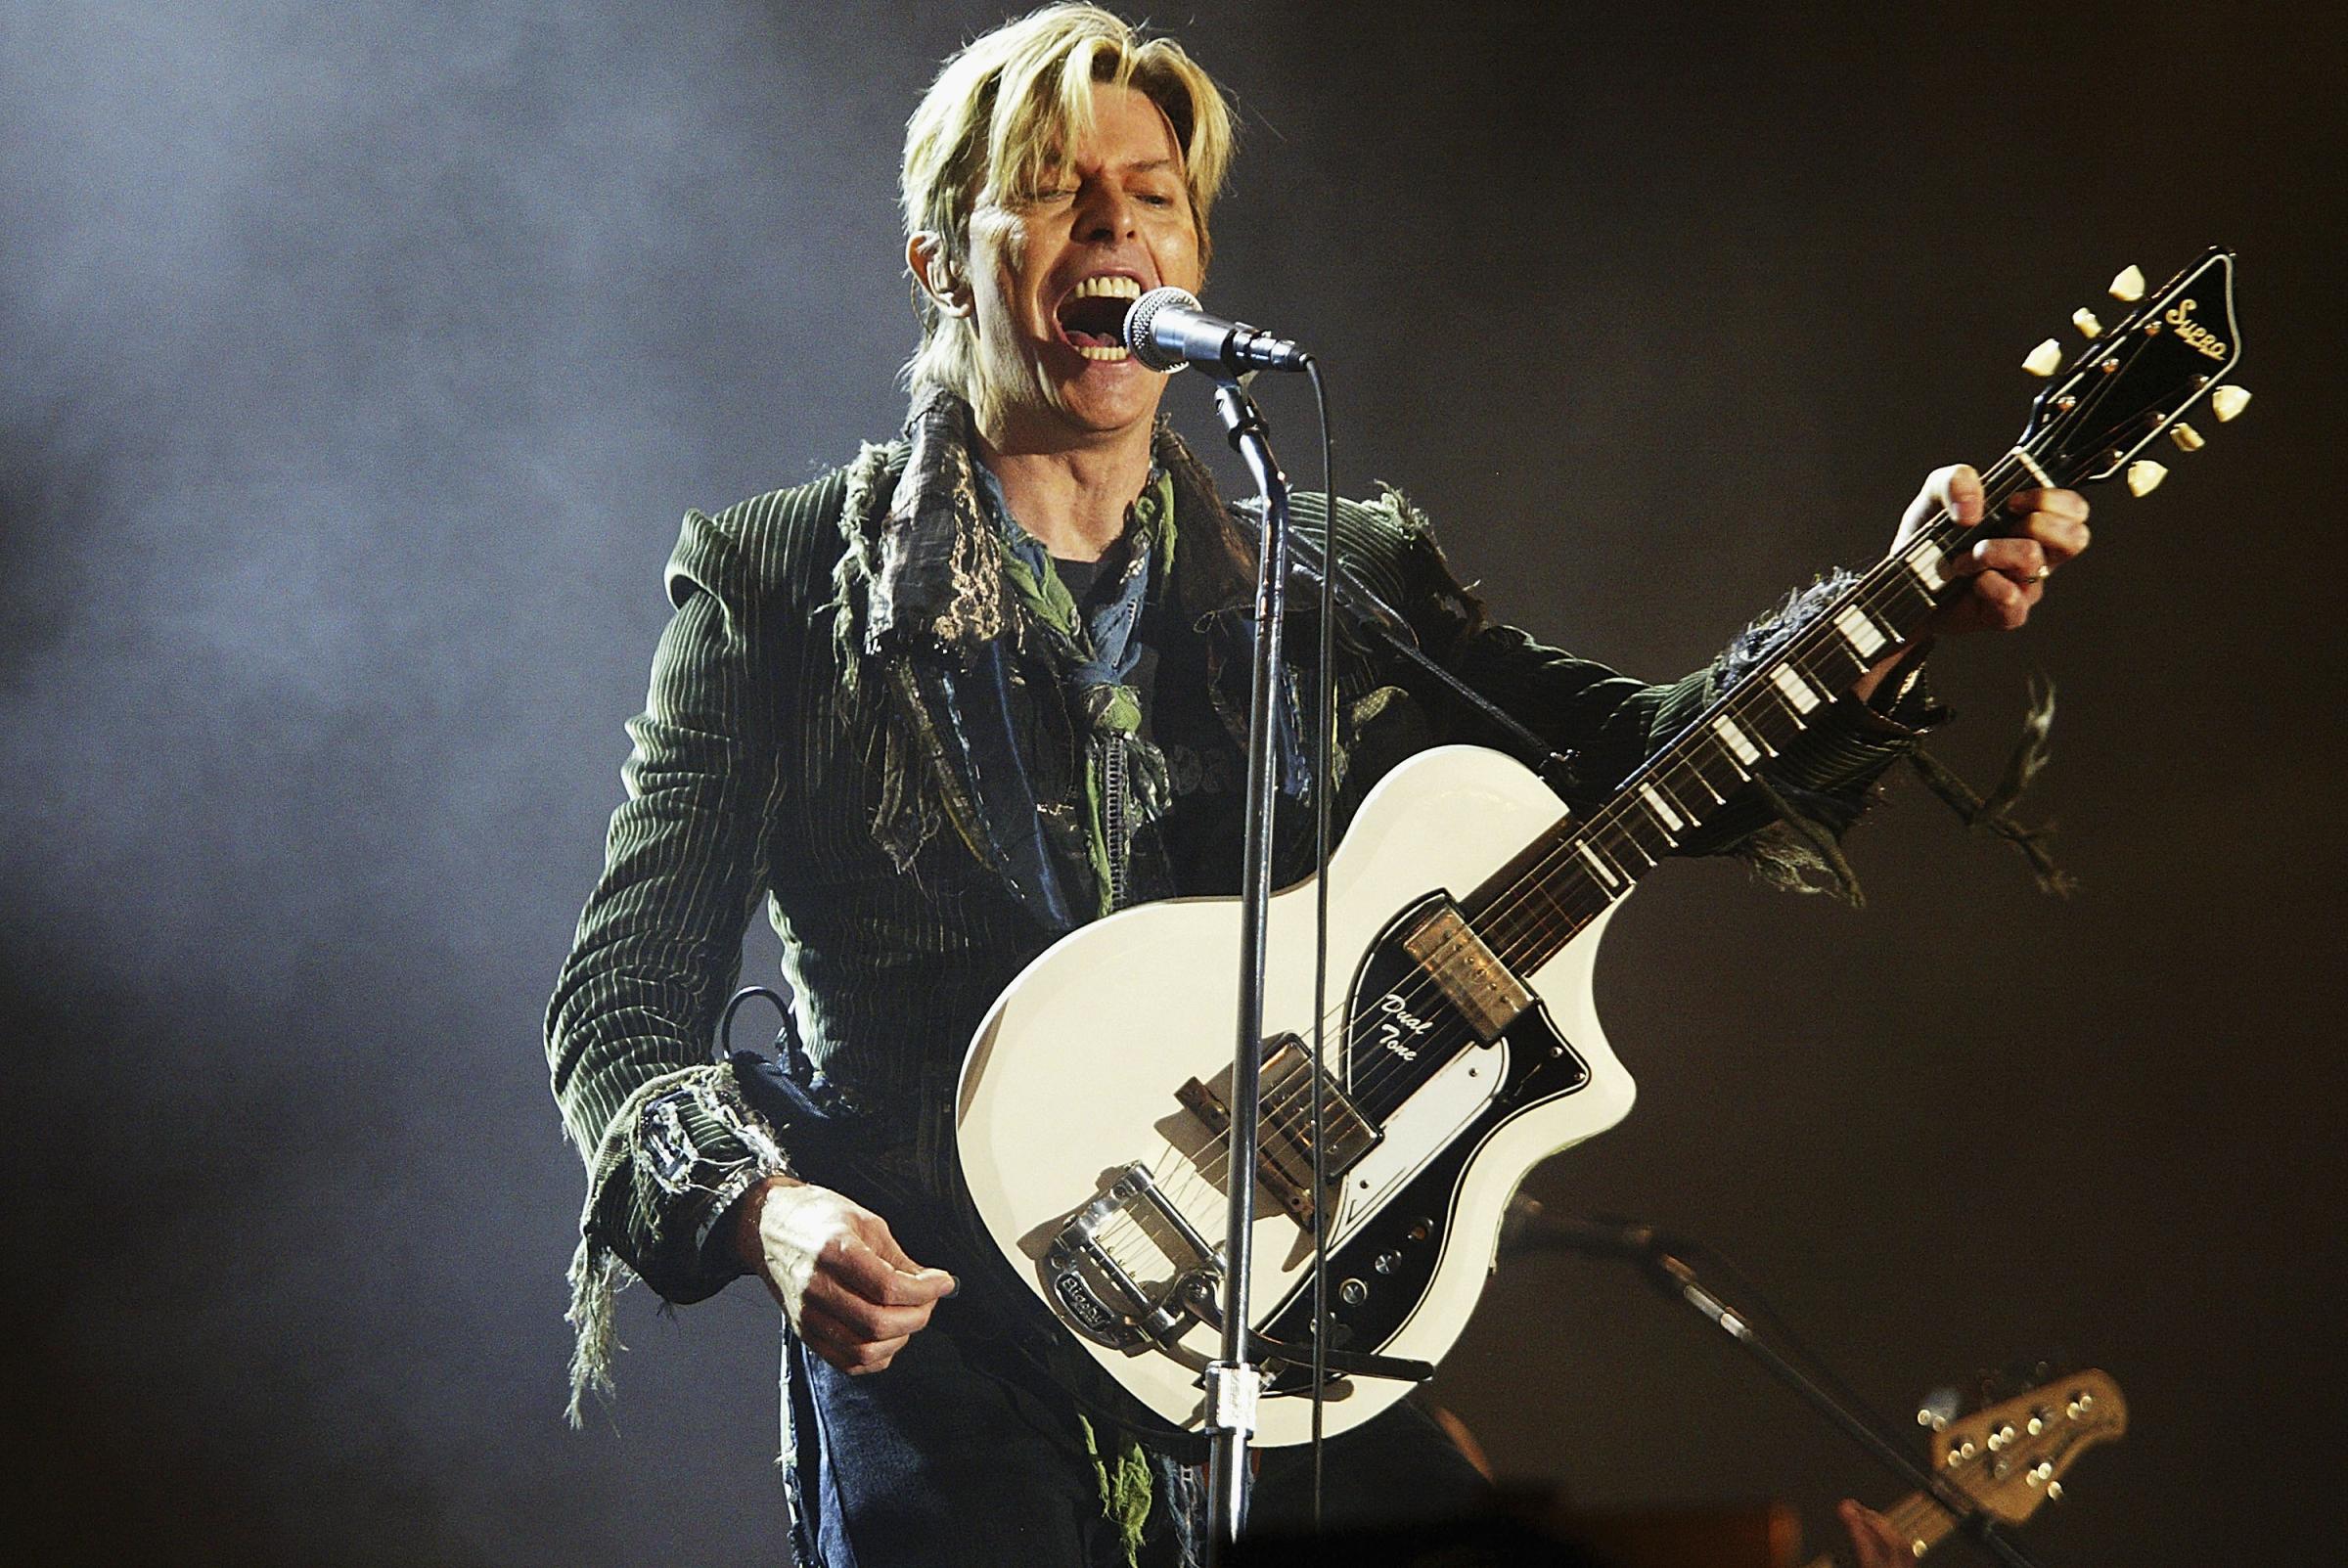 David Bowie performs during the Isle of Wight Festival at Seaclose Park on June 13, 2004 in Newport, U.K.